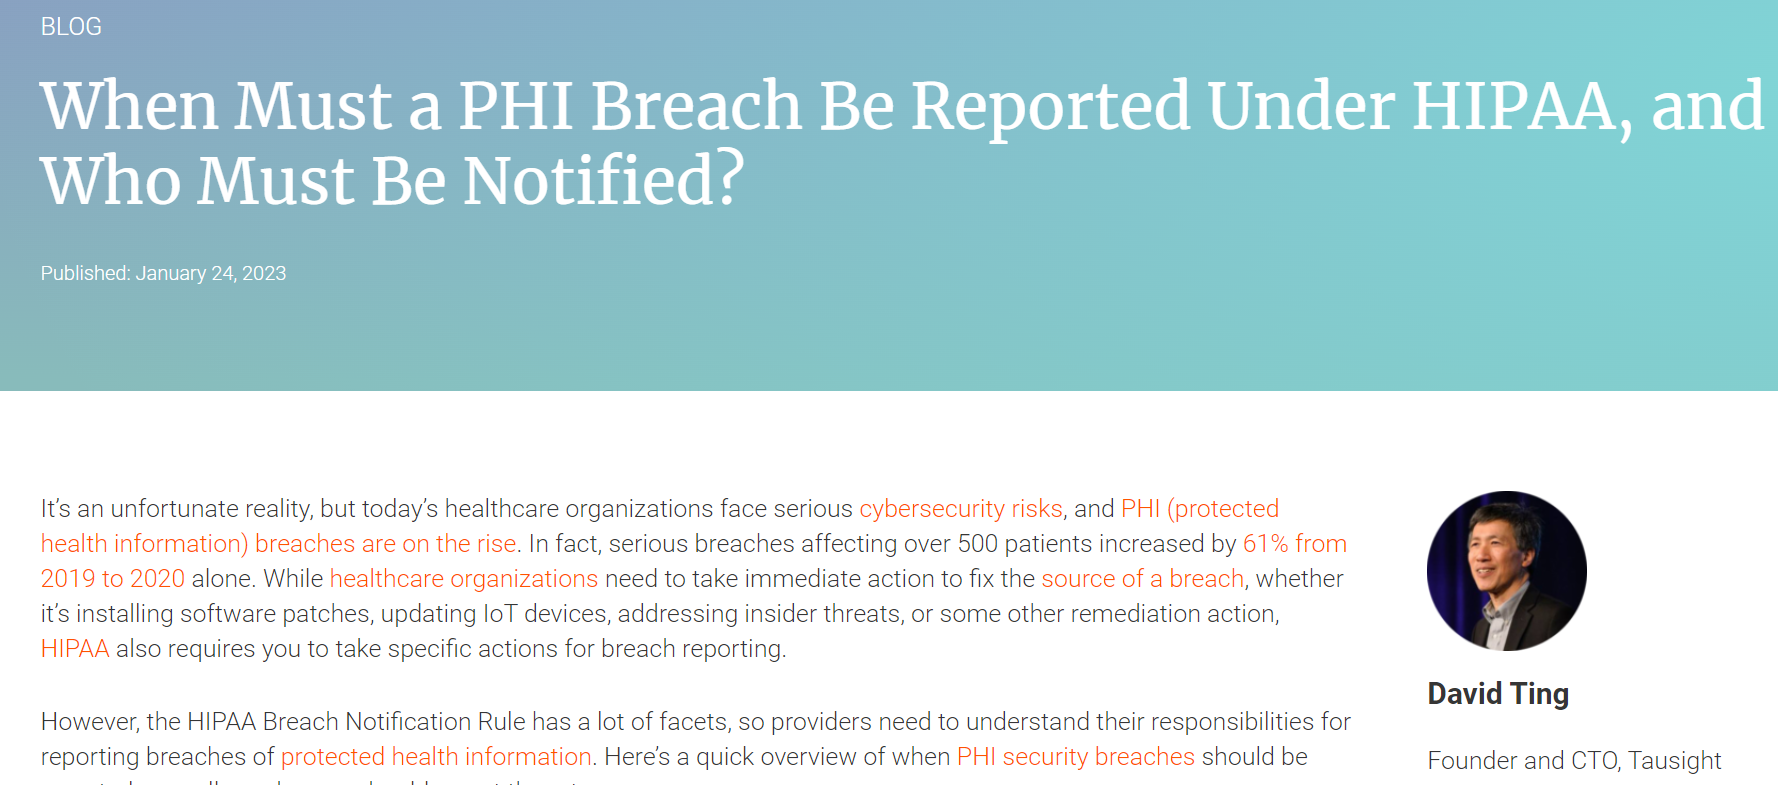 When Must a PHI Breach Be Reported Under HIPAA, and Who Must Be Notified?